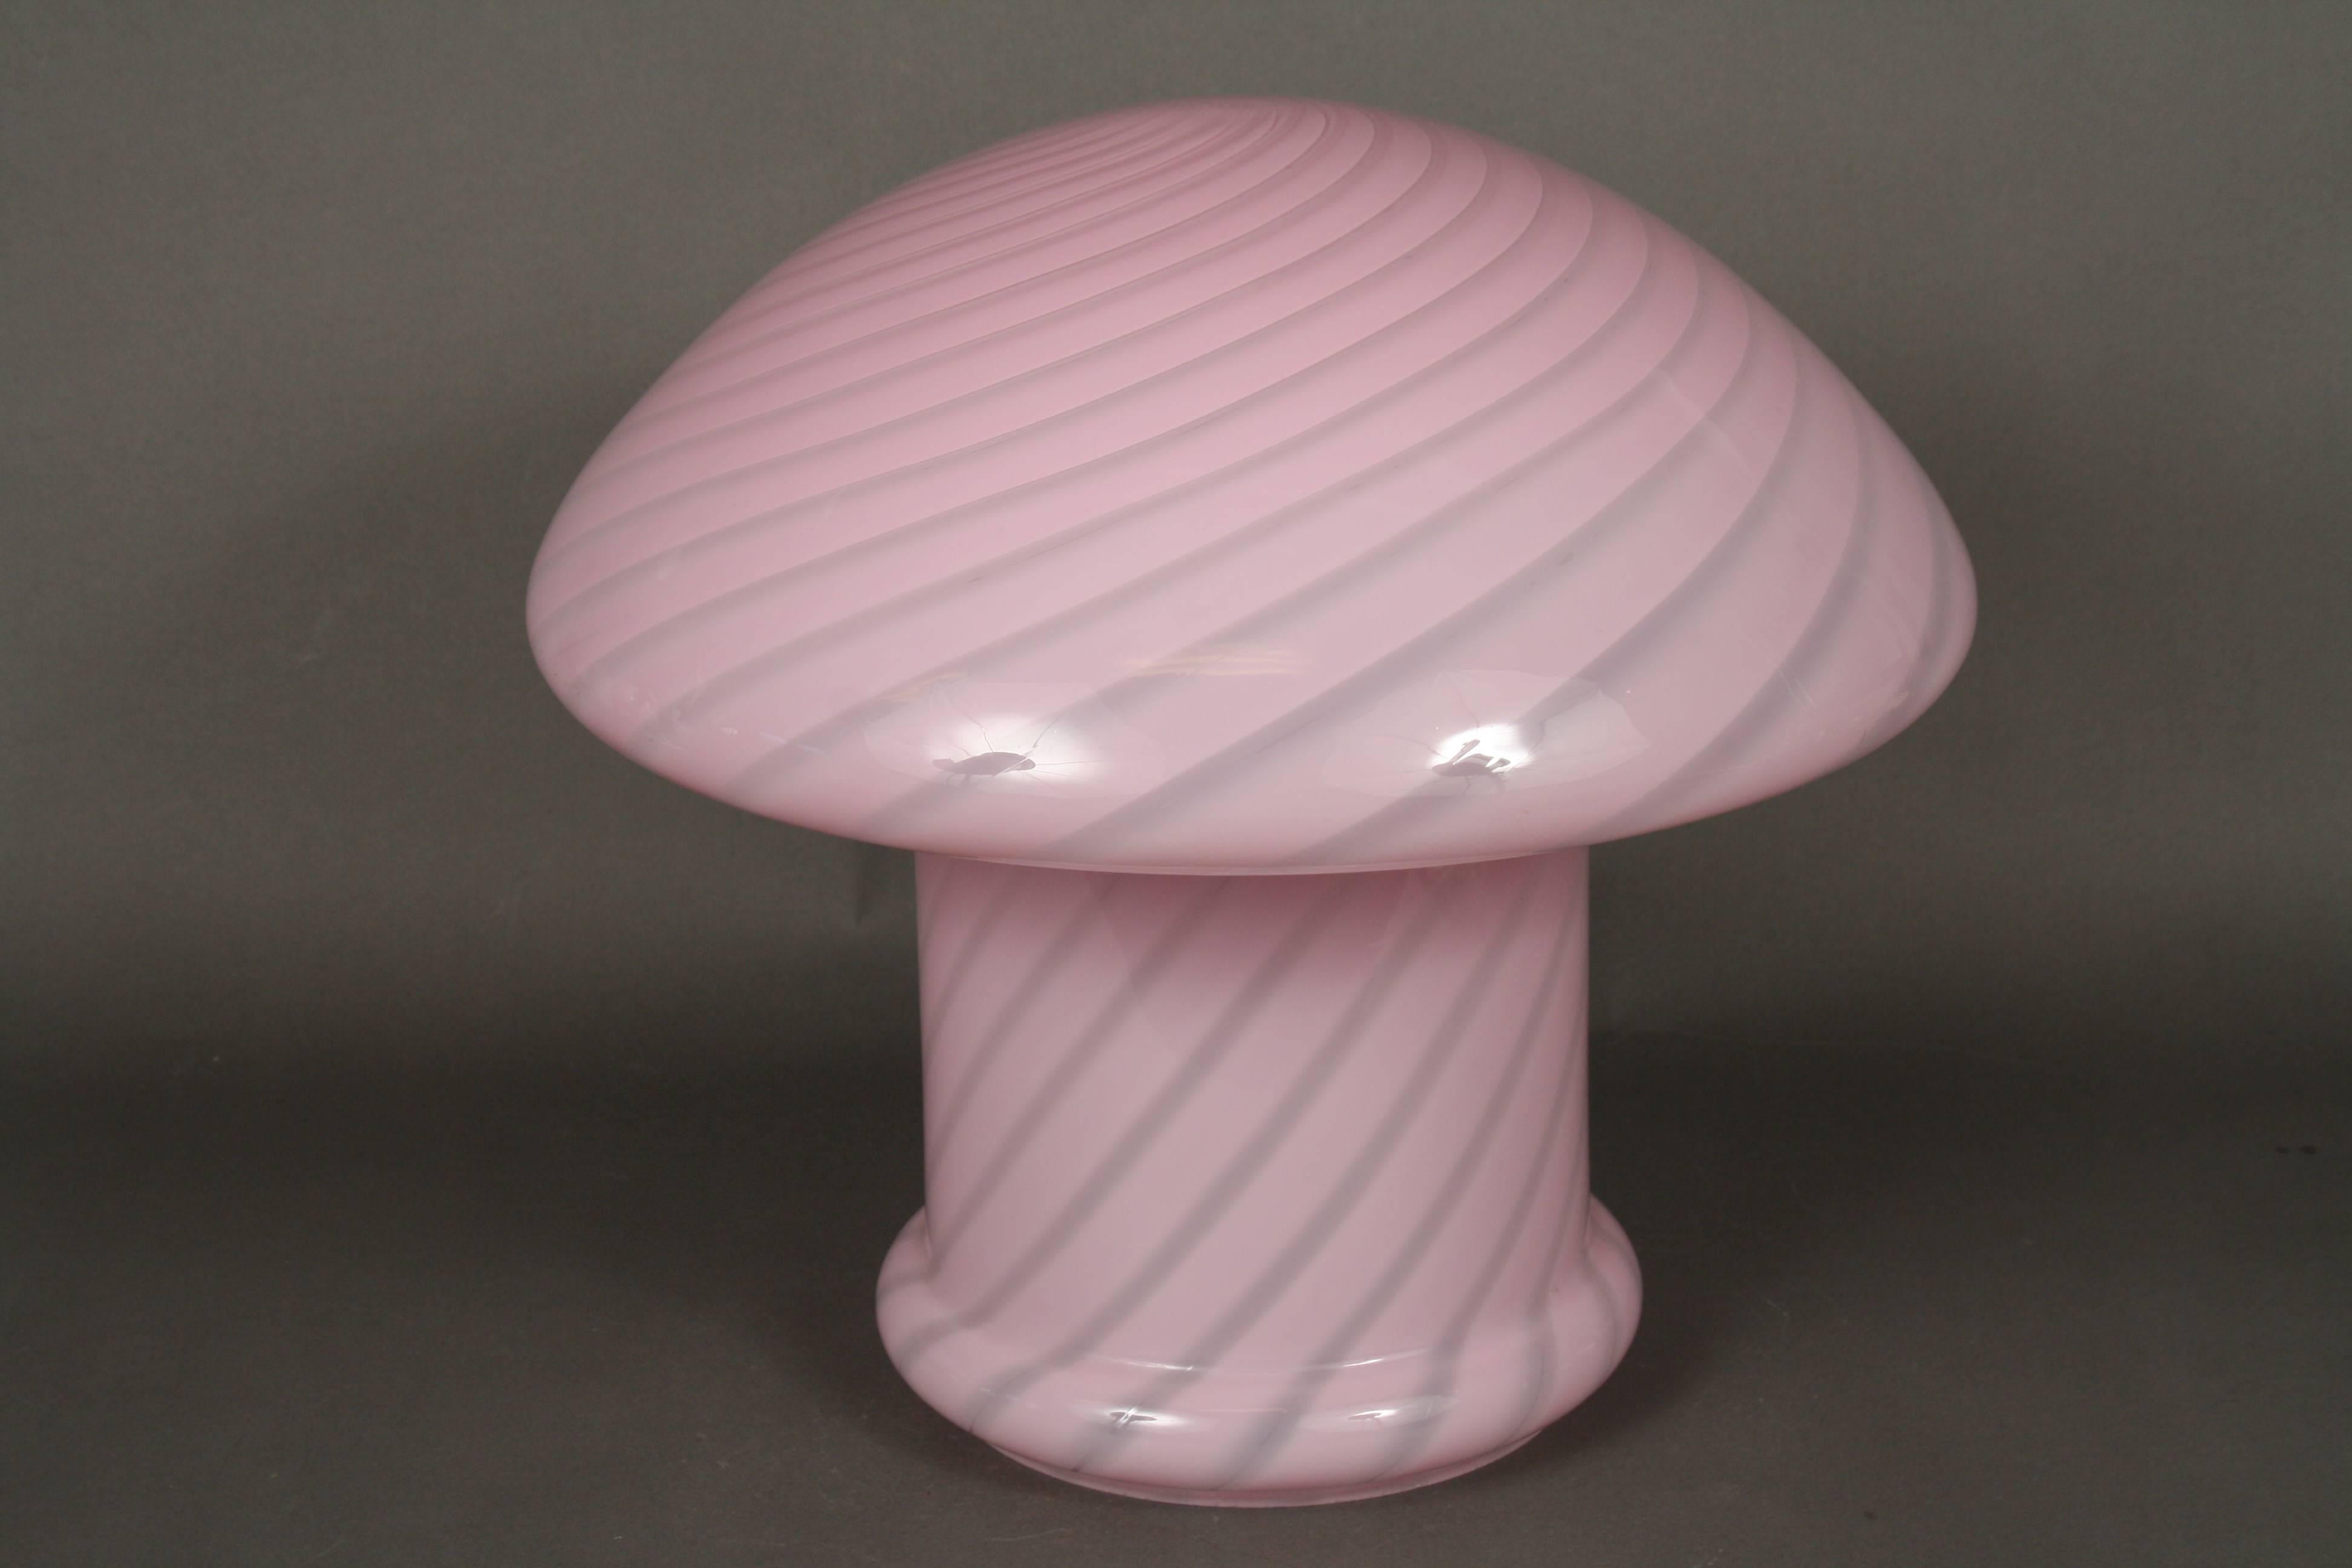 A beautiful 1970s Murano table lamp by the iconic glass maker Vetri, Italia. Stunningly elegant in design and whimsically formed in the shape of a mushroom. Featuring an off centred spiral captured in very beautiful pink glass.